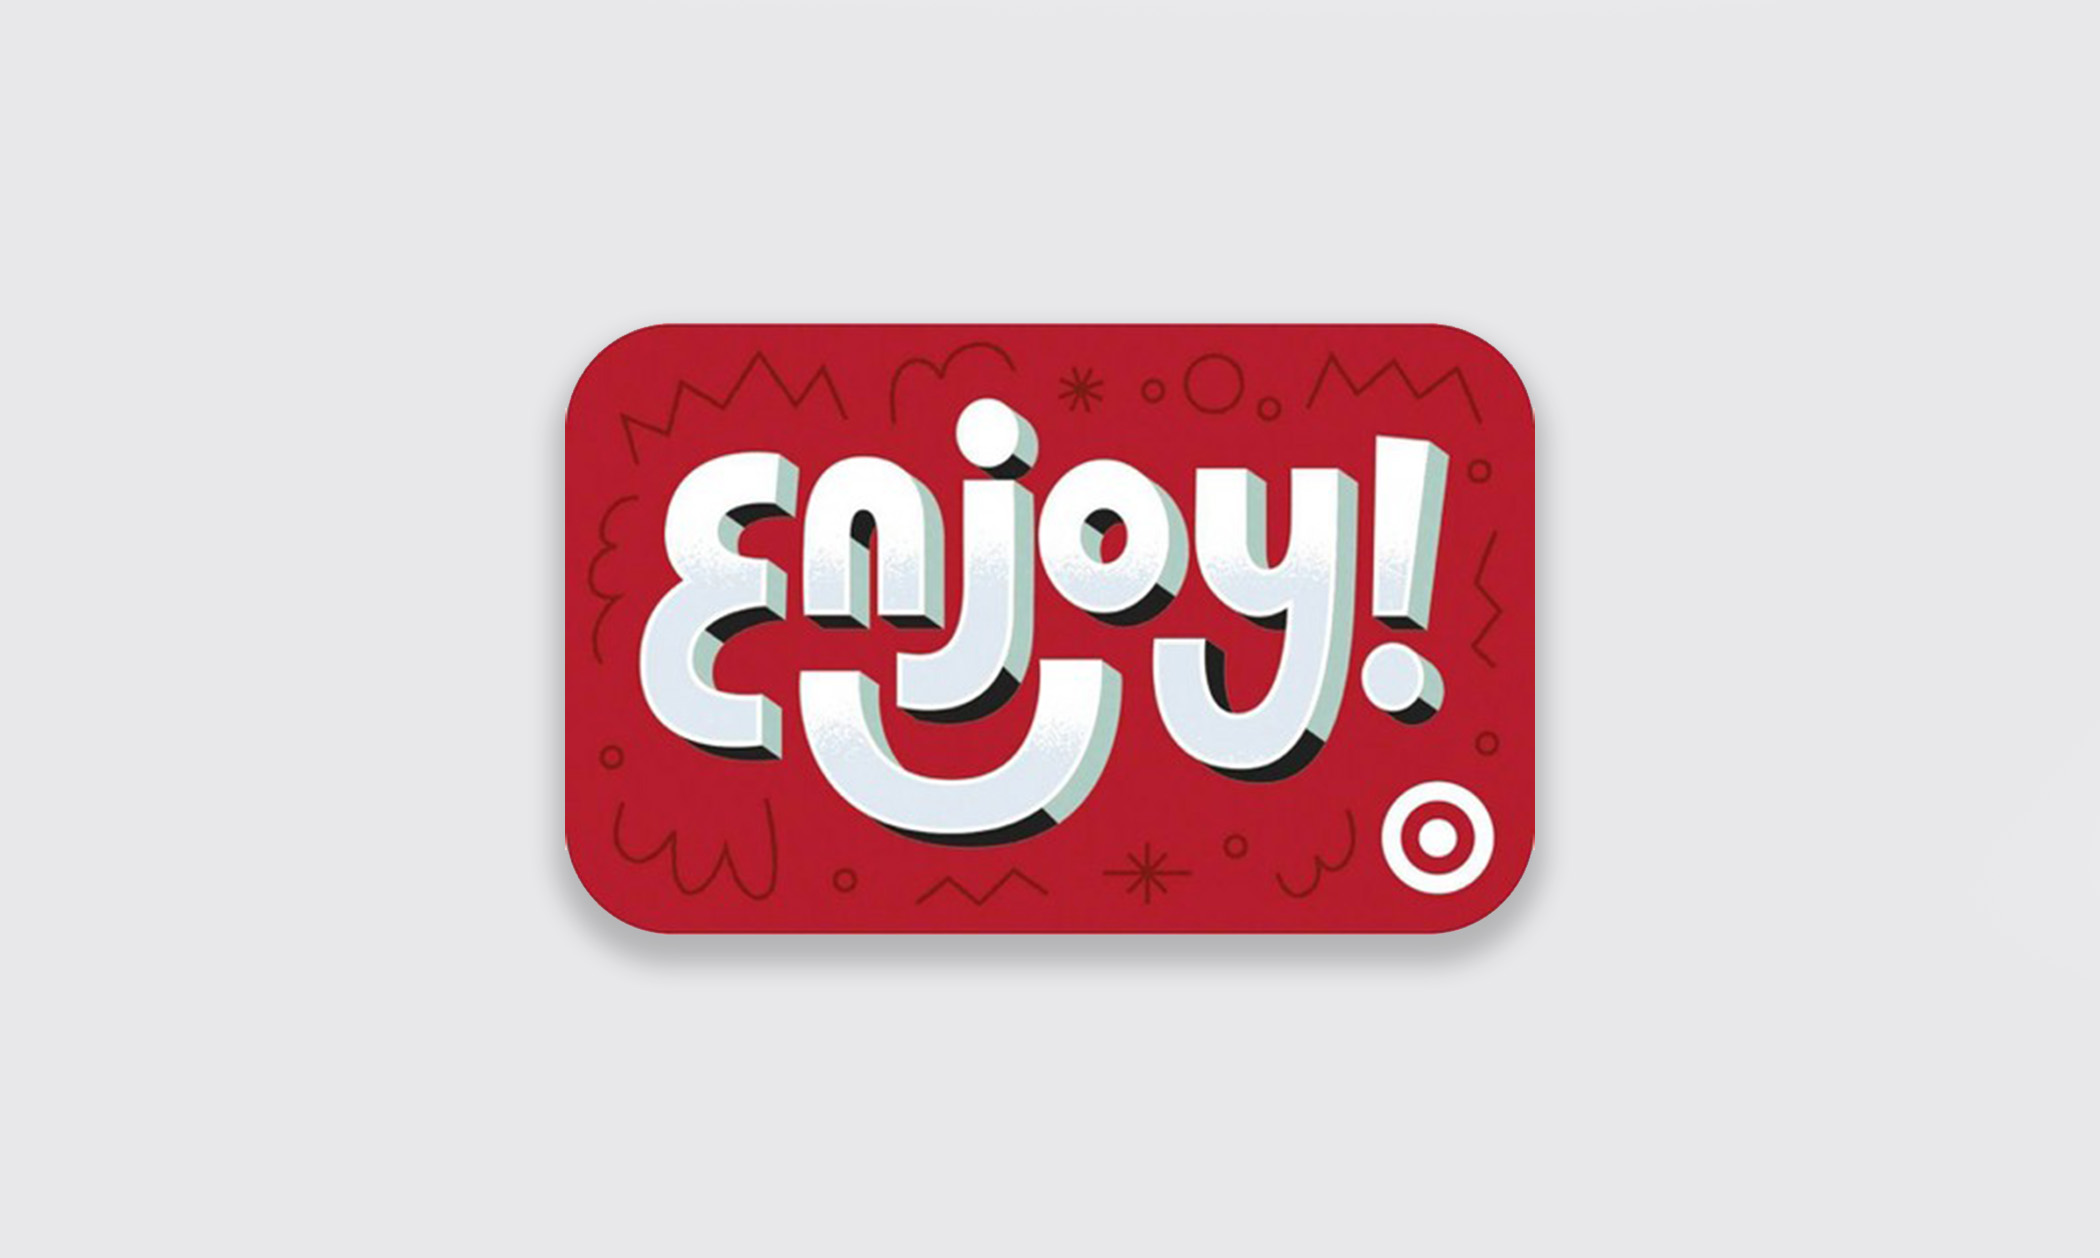 enter-to-win-a-250-target-gift-card-okwow-sweepstakes-and-giveaways